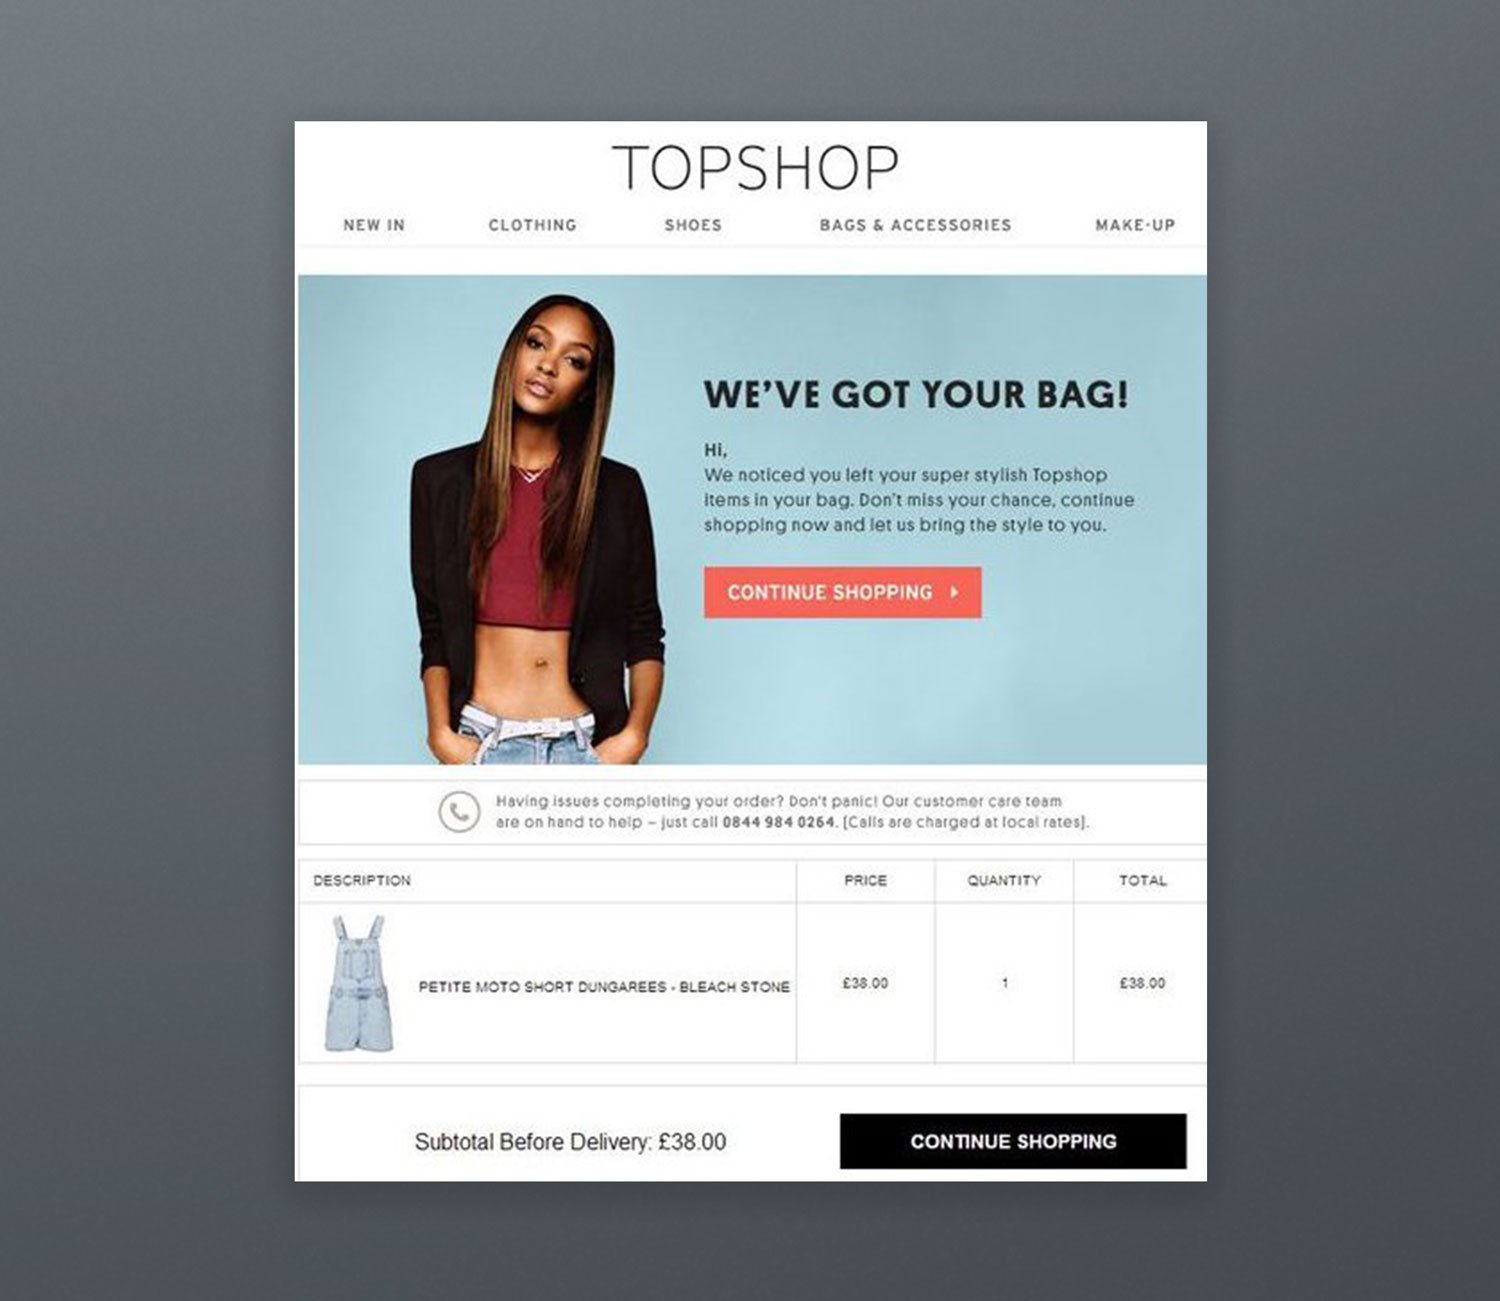 Topshop Email Marketing Example